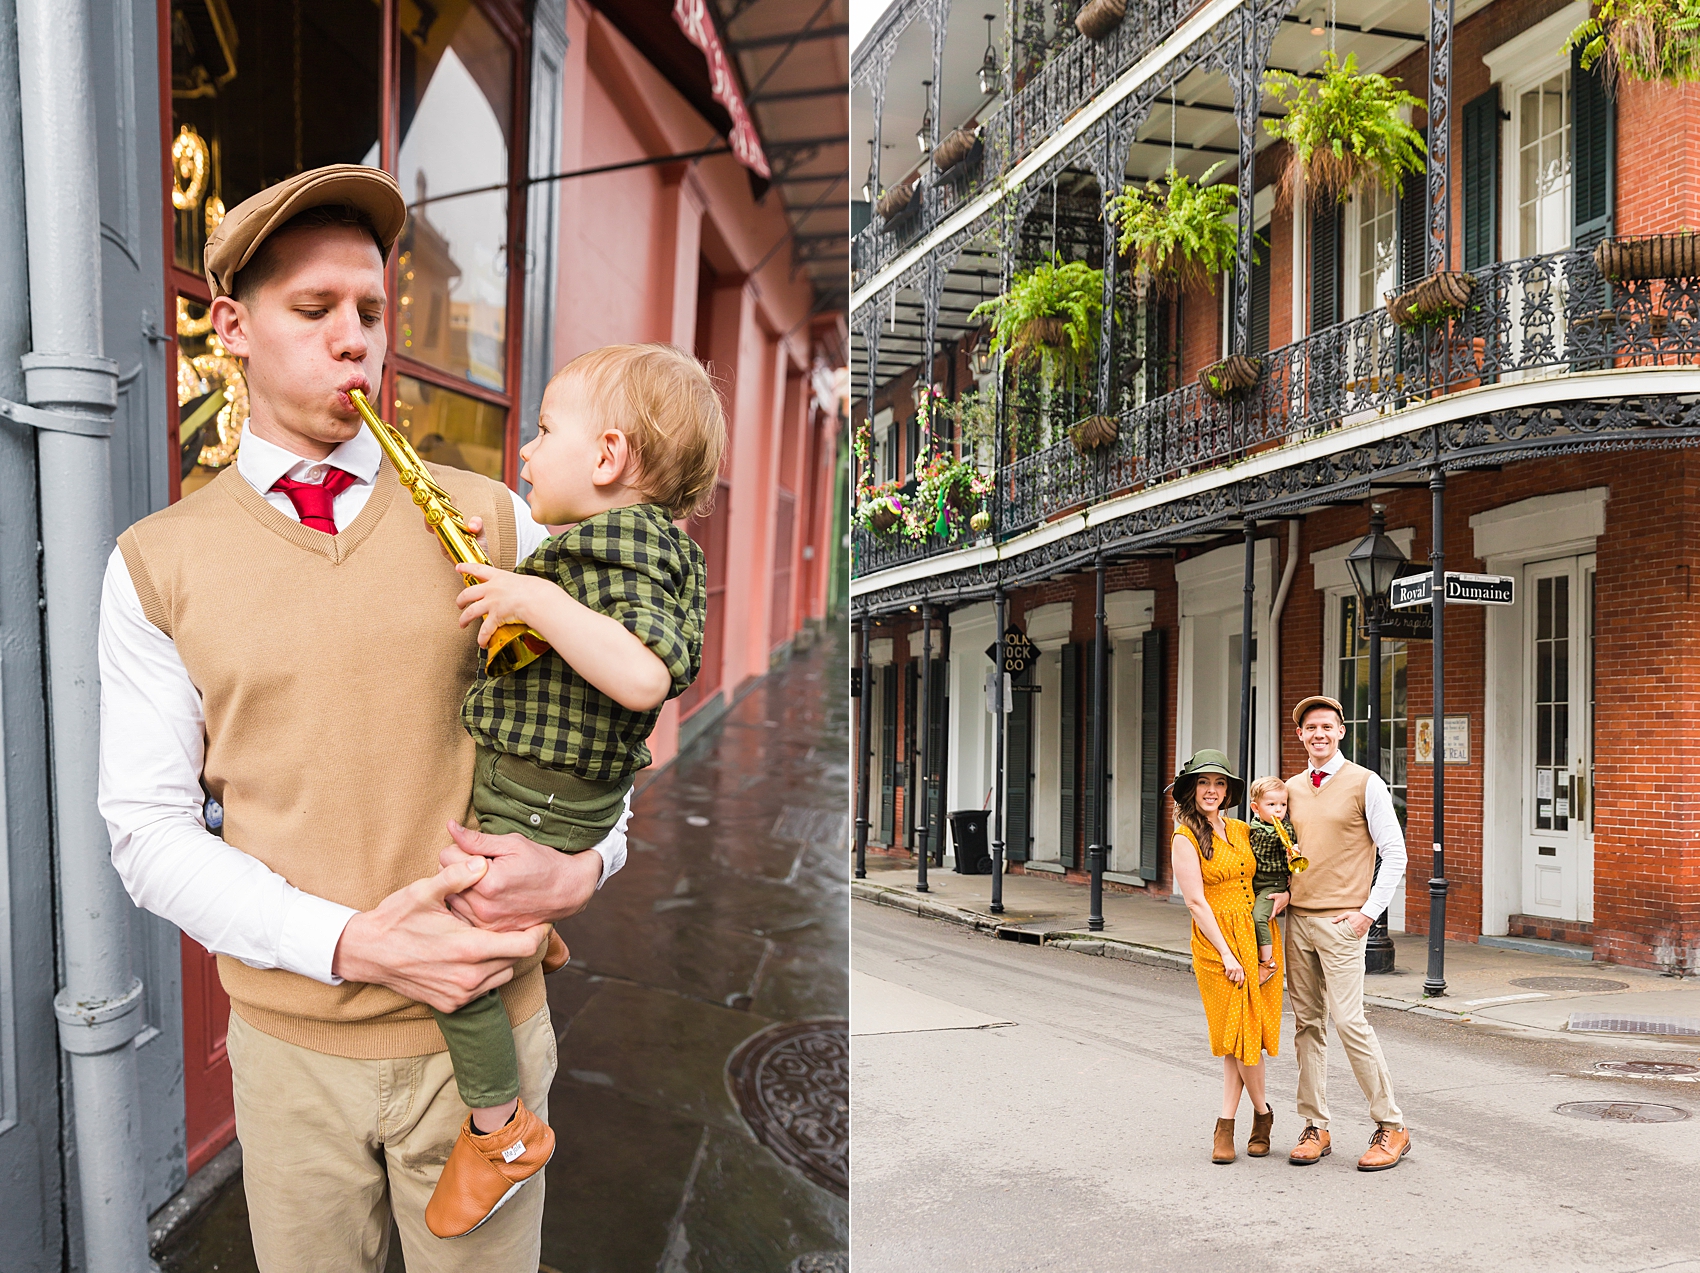 Leah Hope Photography | Scottsdale Phoenix Arizona Photographer | Traveling New Orleans French Quarter NOLA | Family Pictures | Family Photos | What to Wear | Disney Bounding | Princess and The Frog | Disney Family Costumes